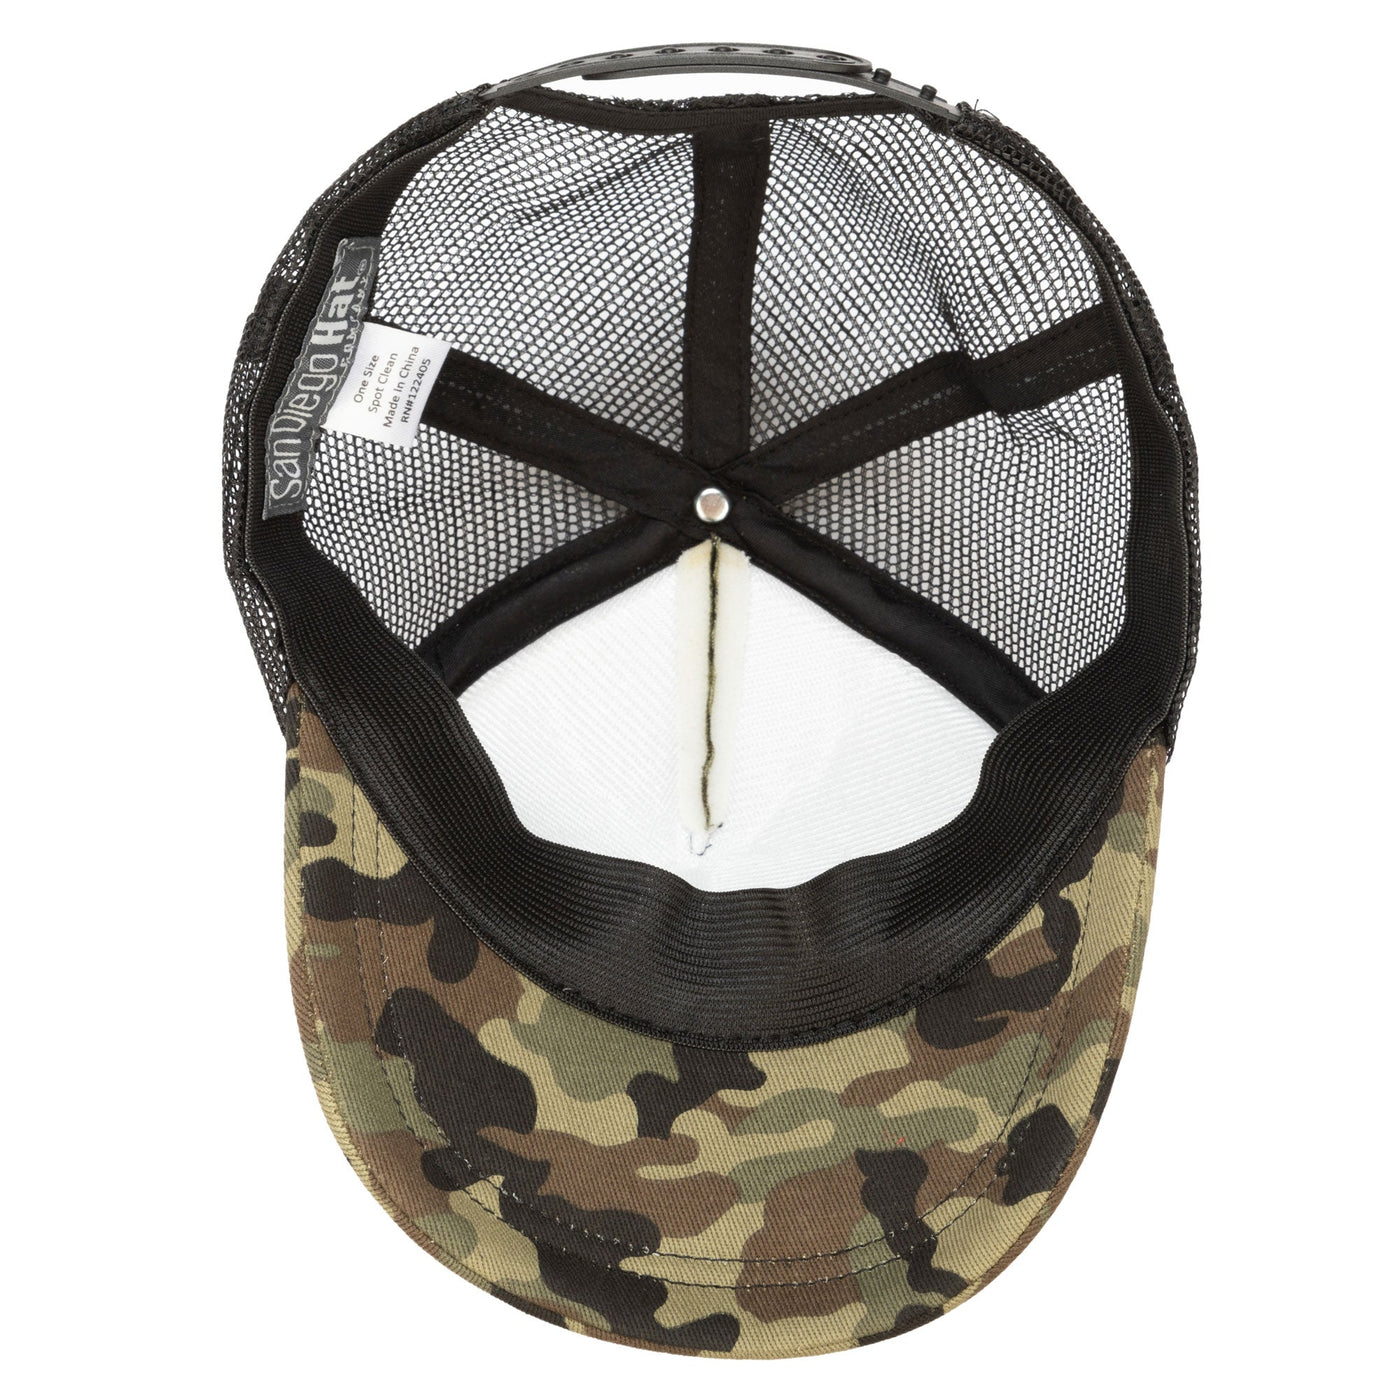 CAP - Camo Cut & Sew Trucker Hat With All Over Camo Print And Mesh Backing